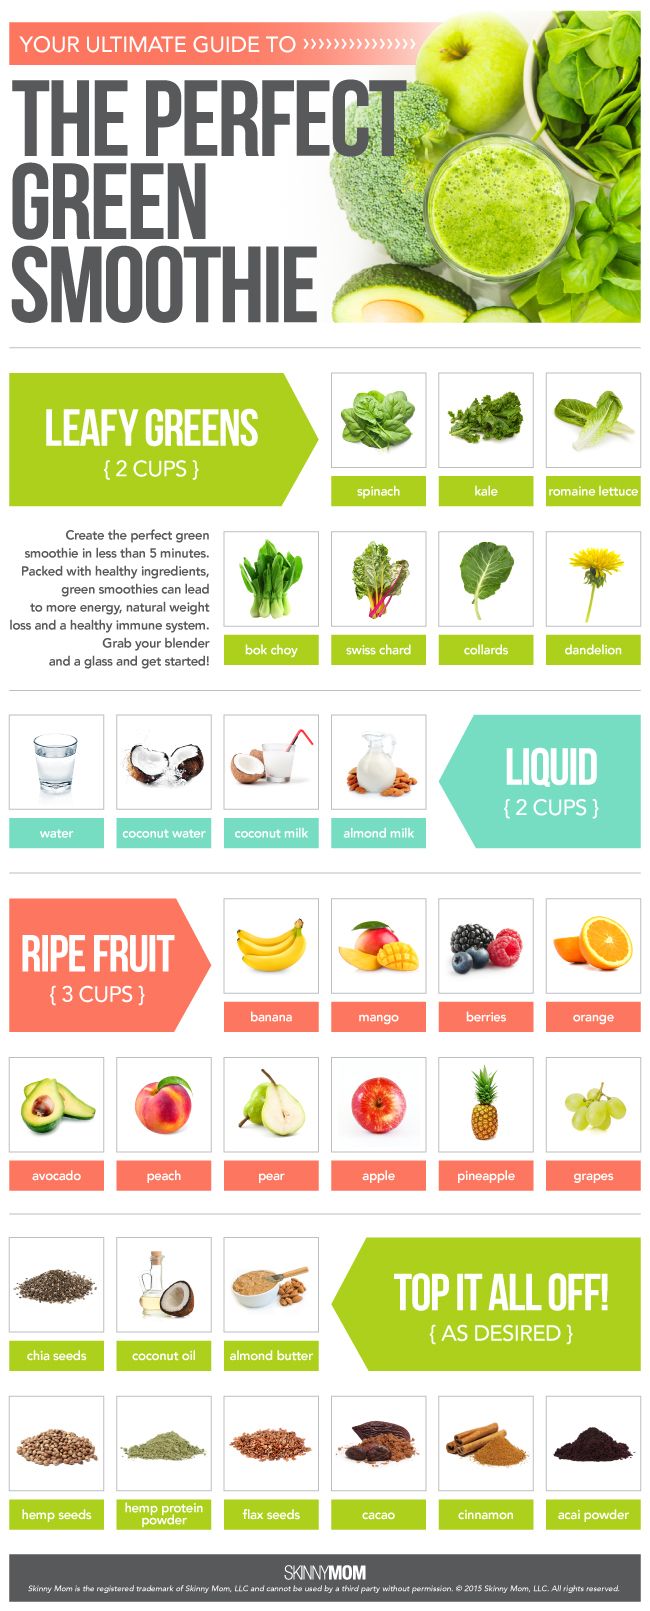 Make Your Perfect Green Smoothie With This Ultimate Guide Infographic